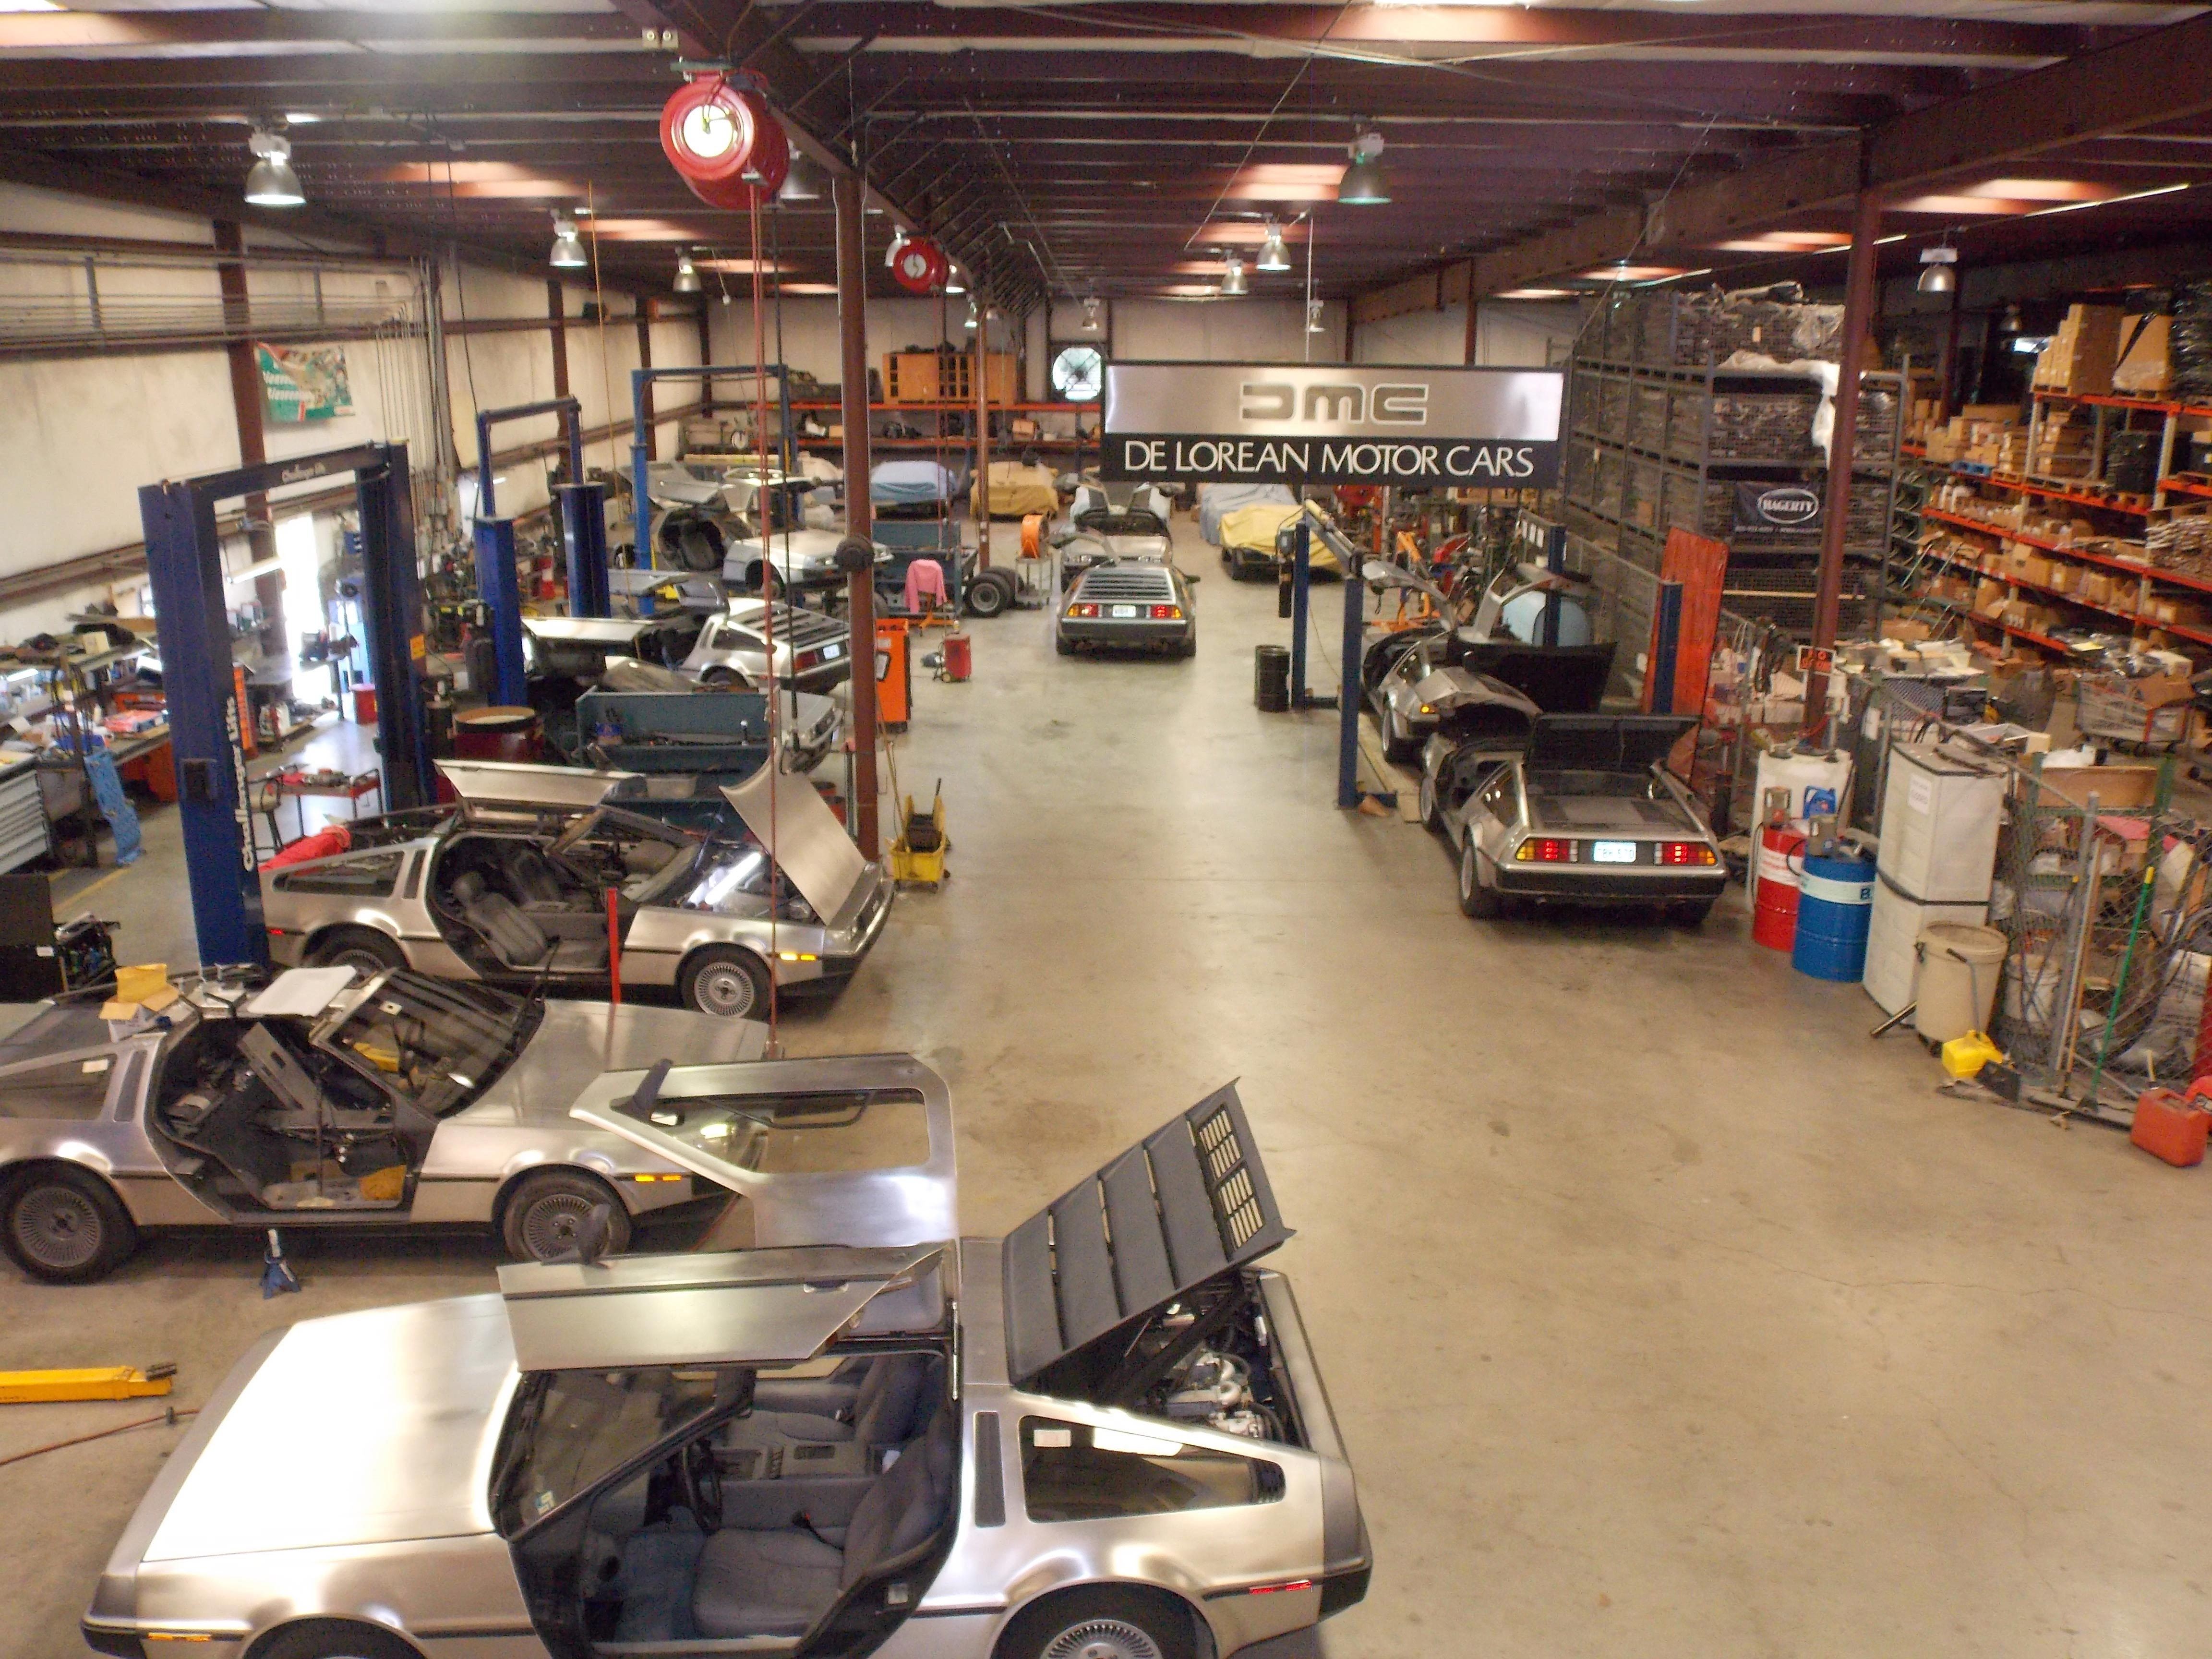 every day many fans of DeLorean and just curious tourists visit the factory